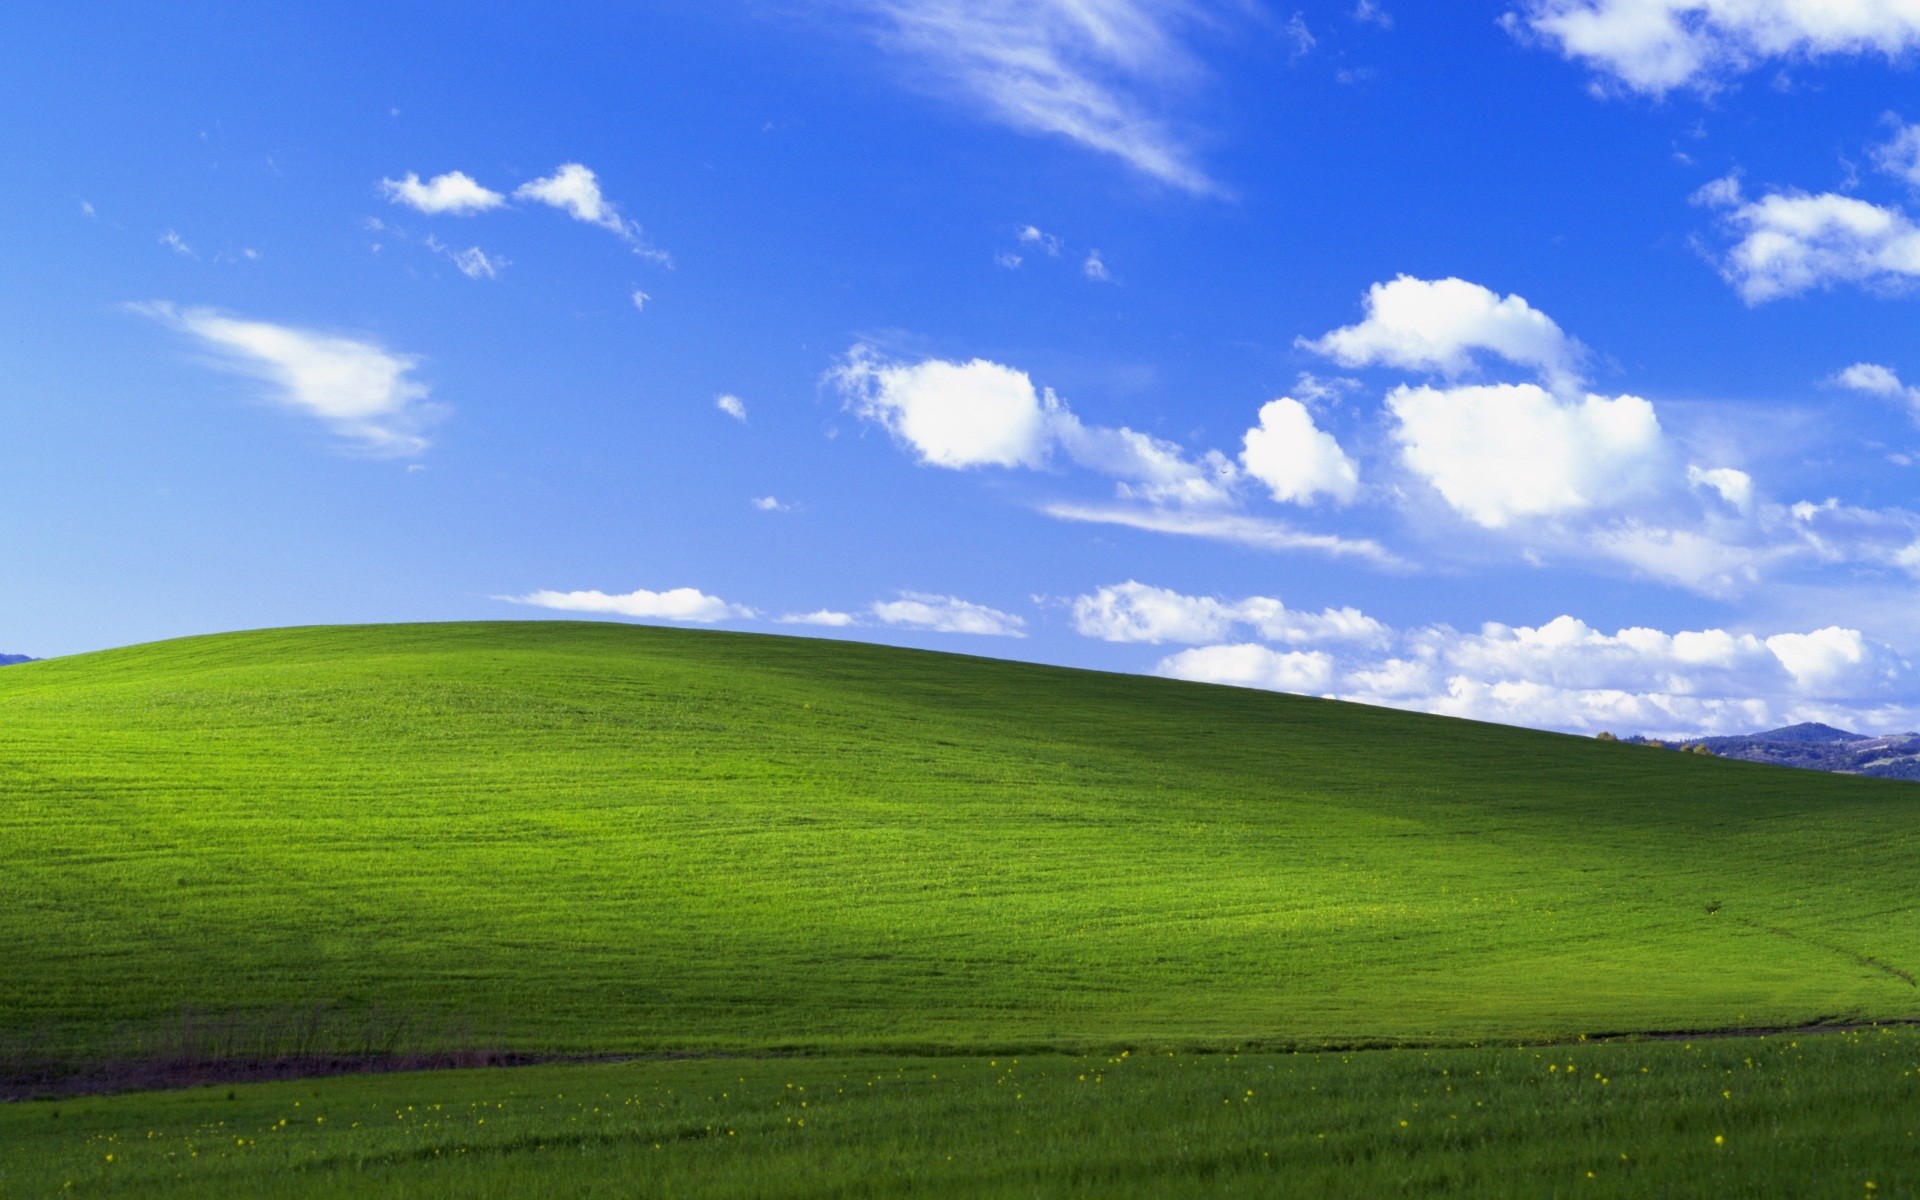 1920x1200 It was used as XP's default wallpaper, and owing to the simplicity,  tranquility and use of cool colors (green for the grass and ...